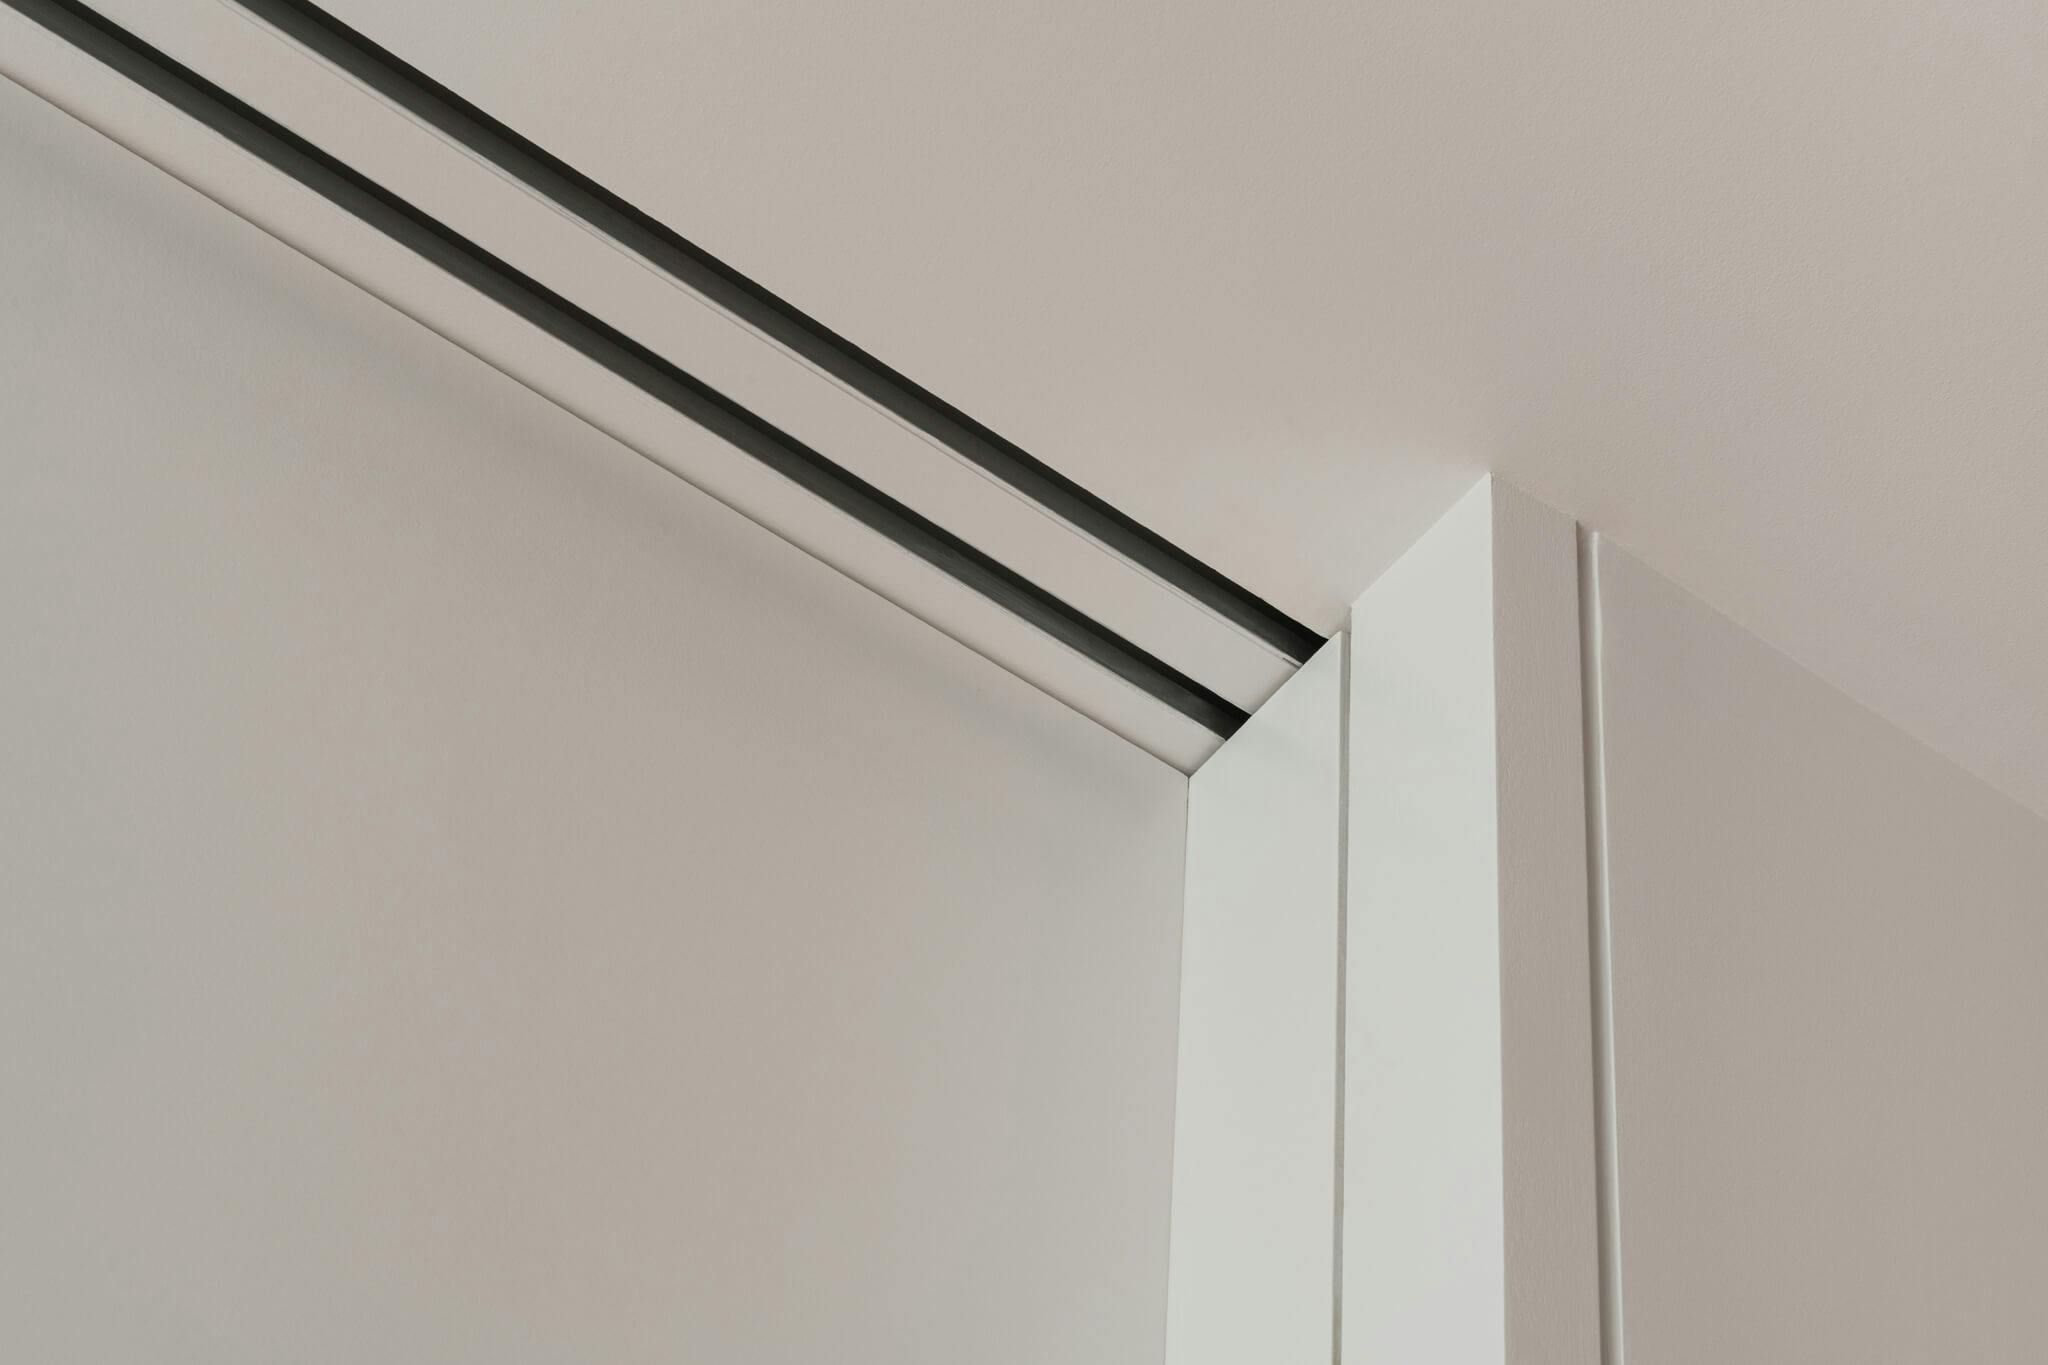 Two tracks of a double telescopic sliding door set in a white interior.